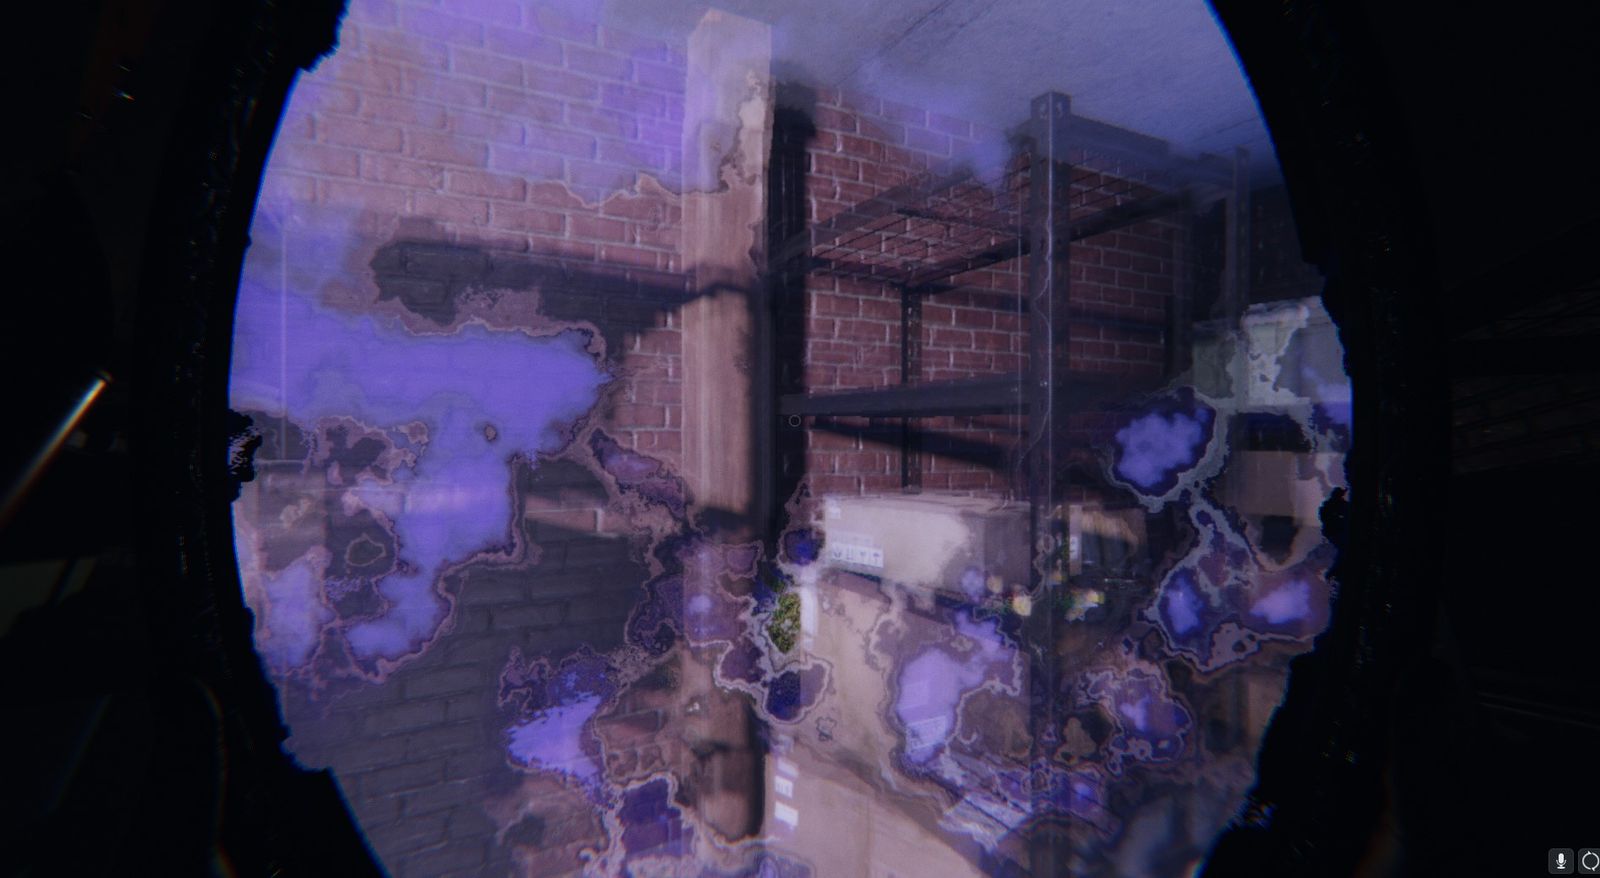 A player looks through the Haunted Mirror in Phasmophobia to reveal the ghost's room.